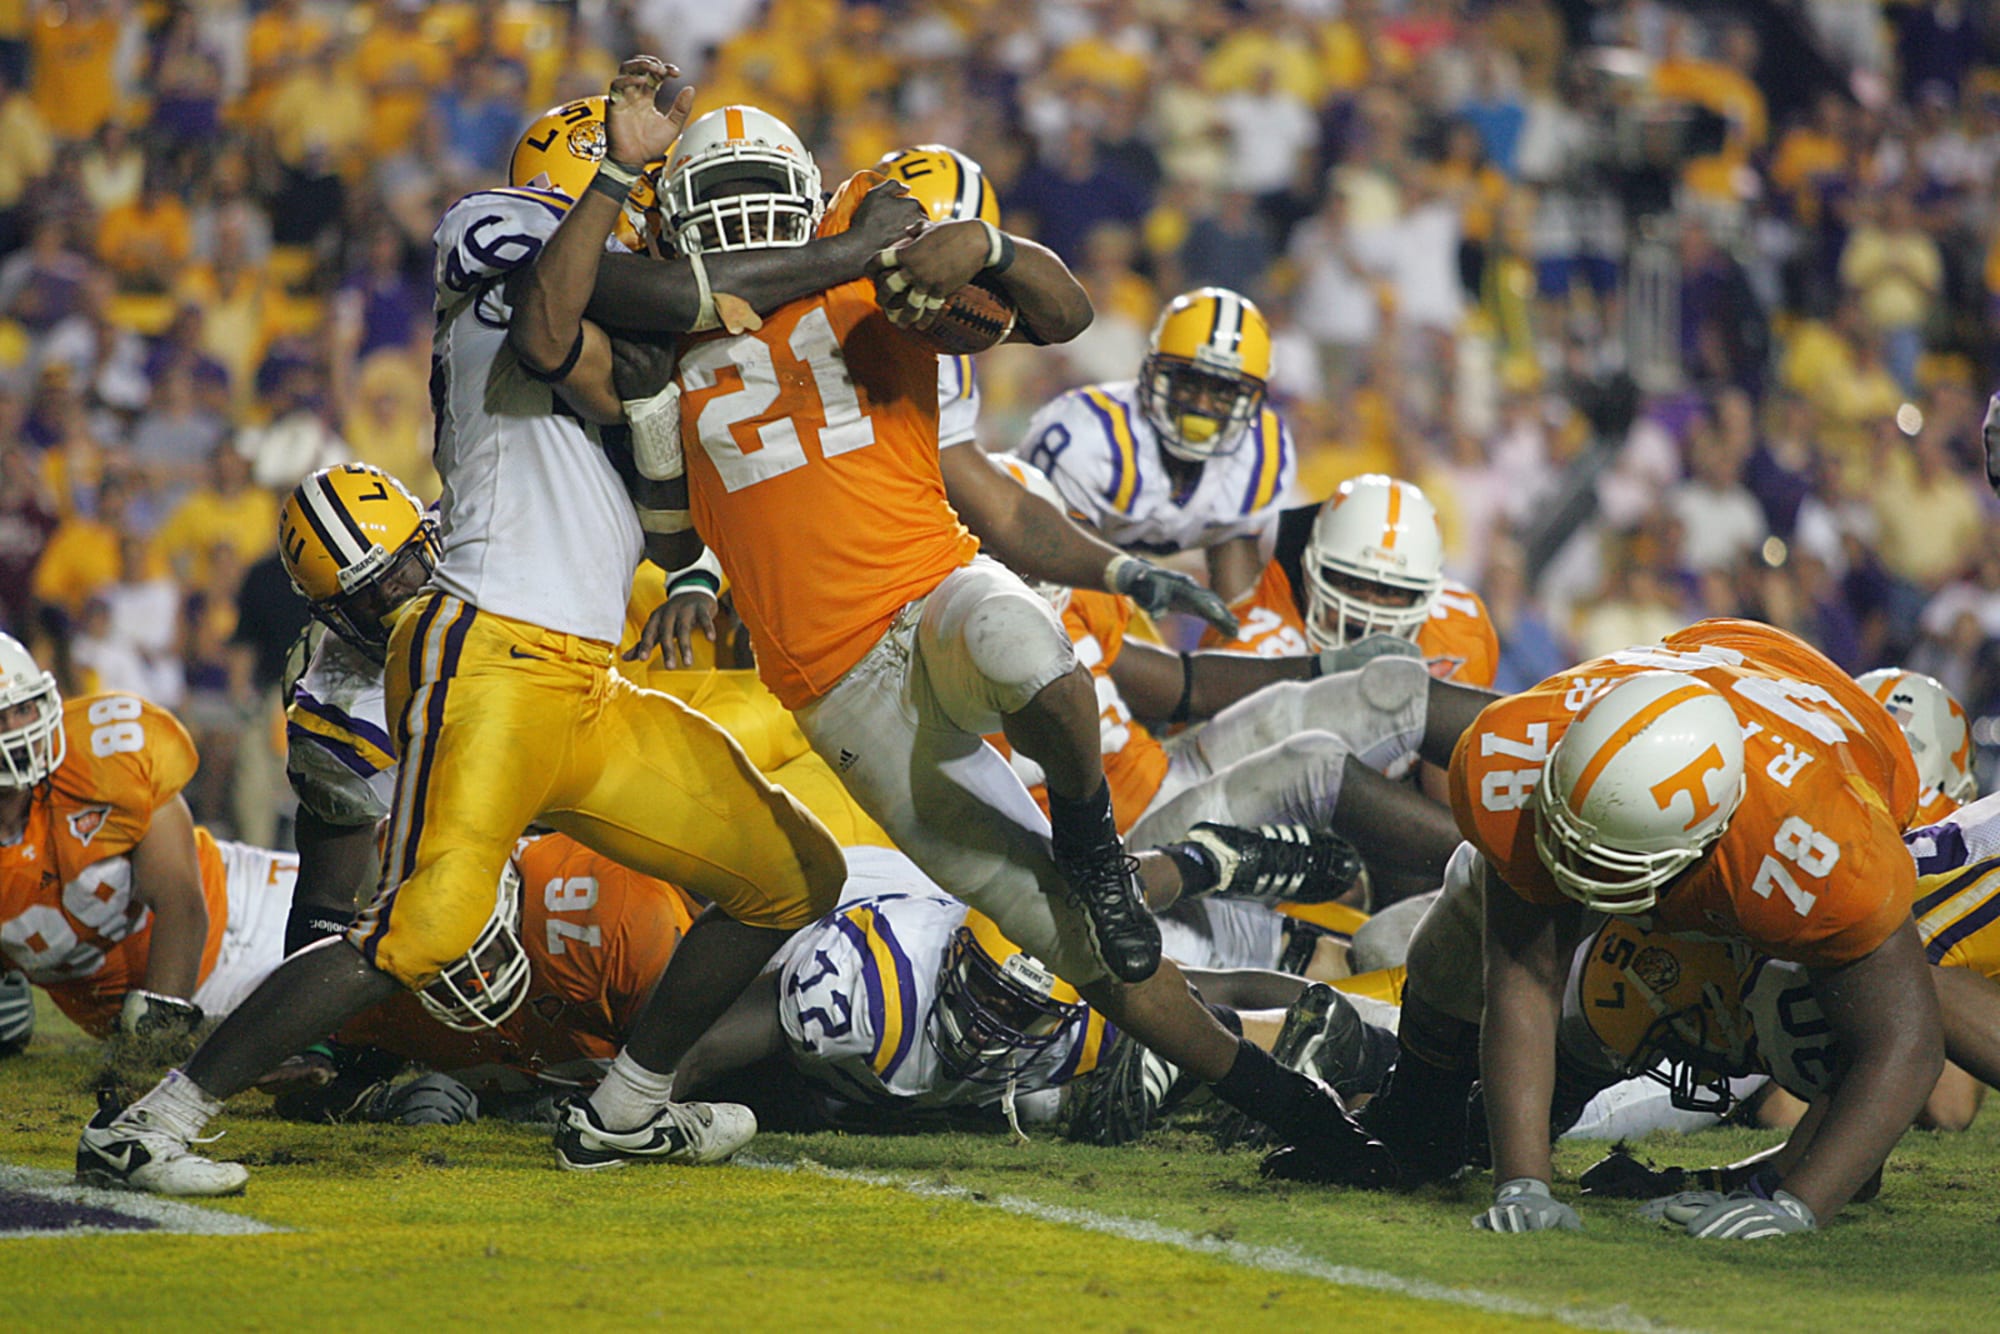 Tennessee football vs. LSU Wild endings, upsets, historically